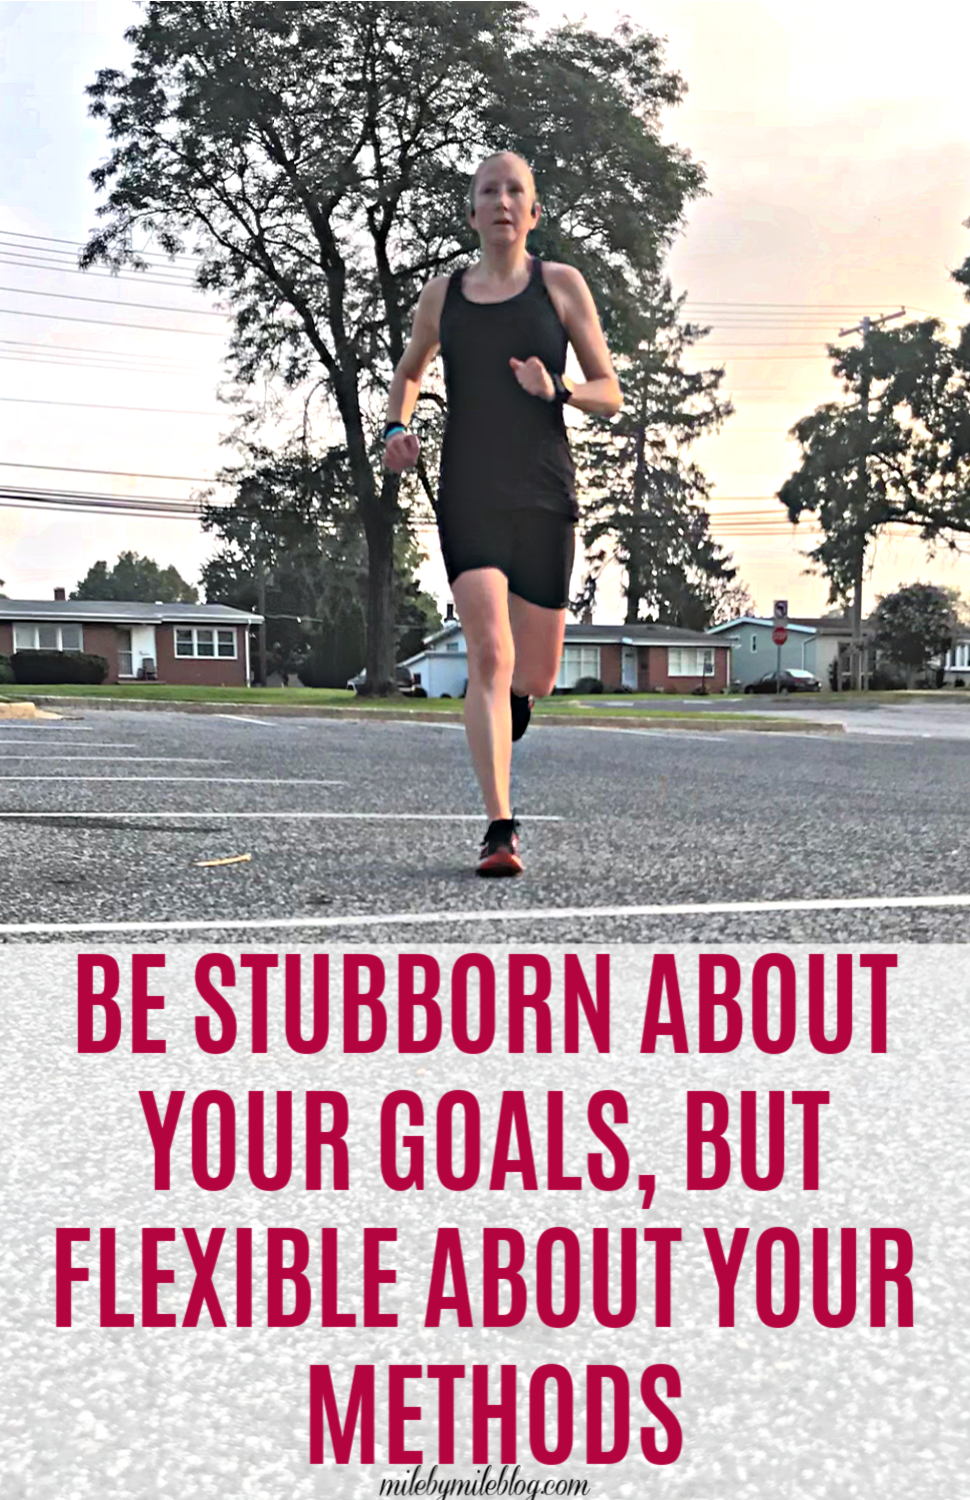 My intention for this year is "Be stubborn about your goals, but flexible about your methods". I have big goals for this year so I have done some planning to address challenges I know I will face. Click post to read about how I am setting goals and addressing challenges by being flexible. #goals #training #running